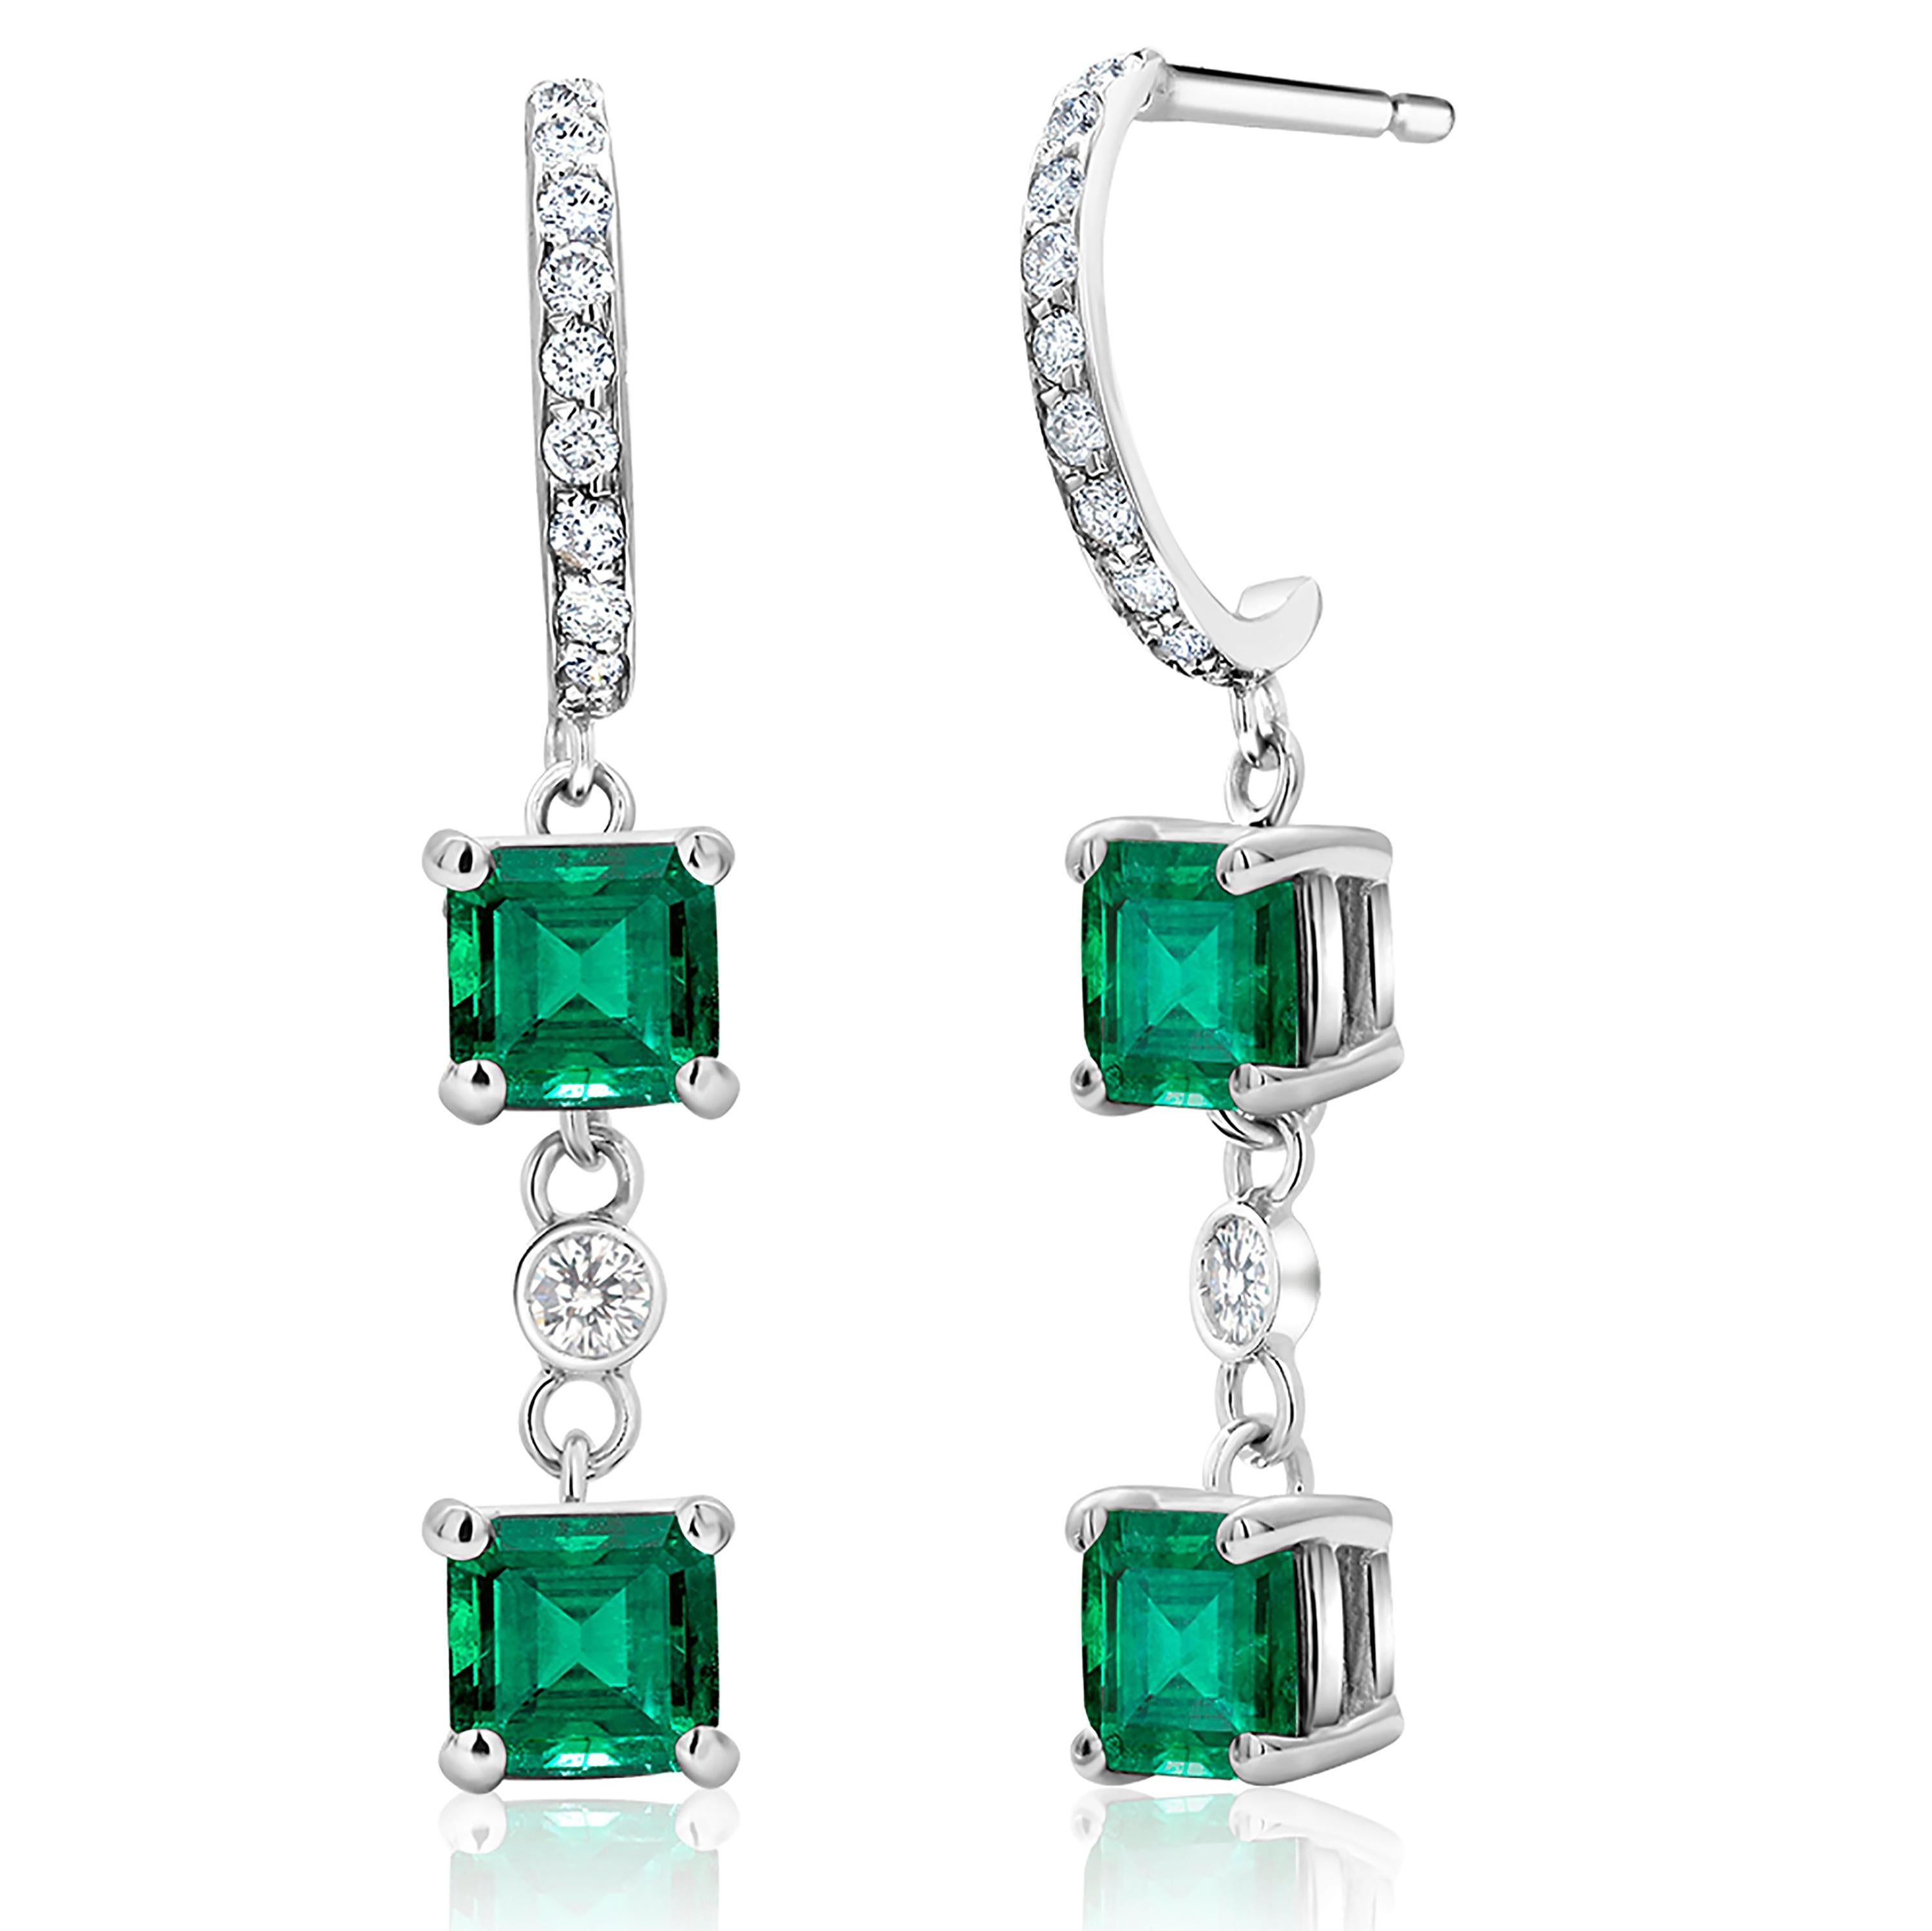 Contemporary Cushion Square Colombian Emerald and Diamond Hoop Earrings Weighing 2.80 Carat